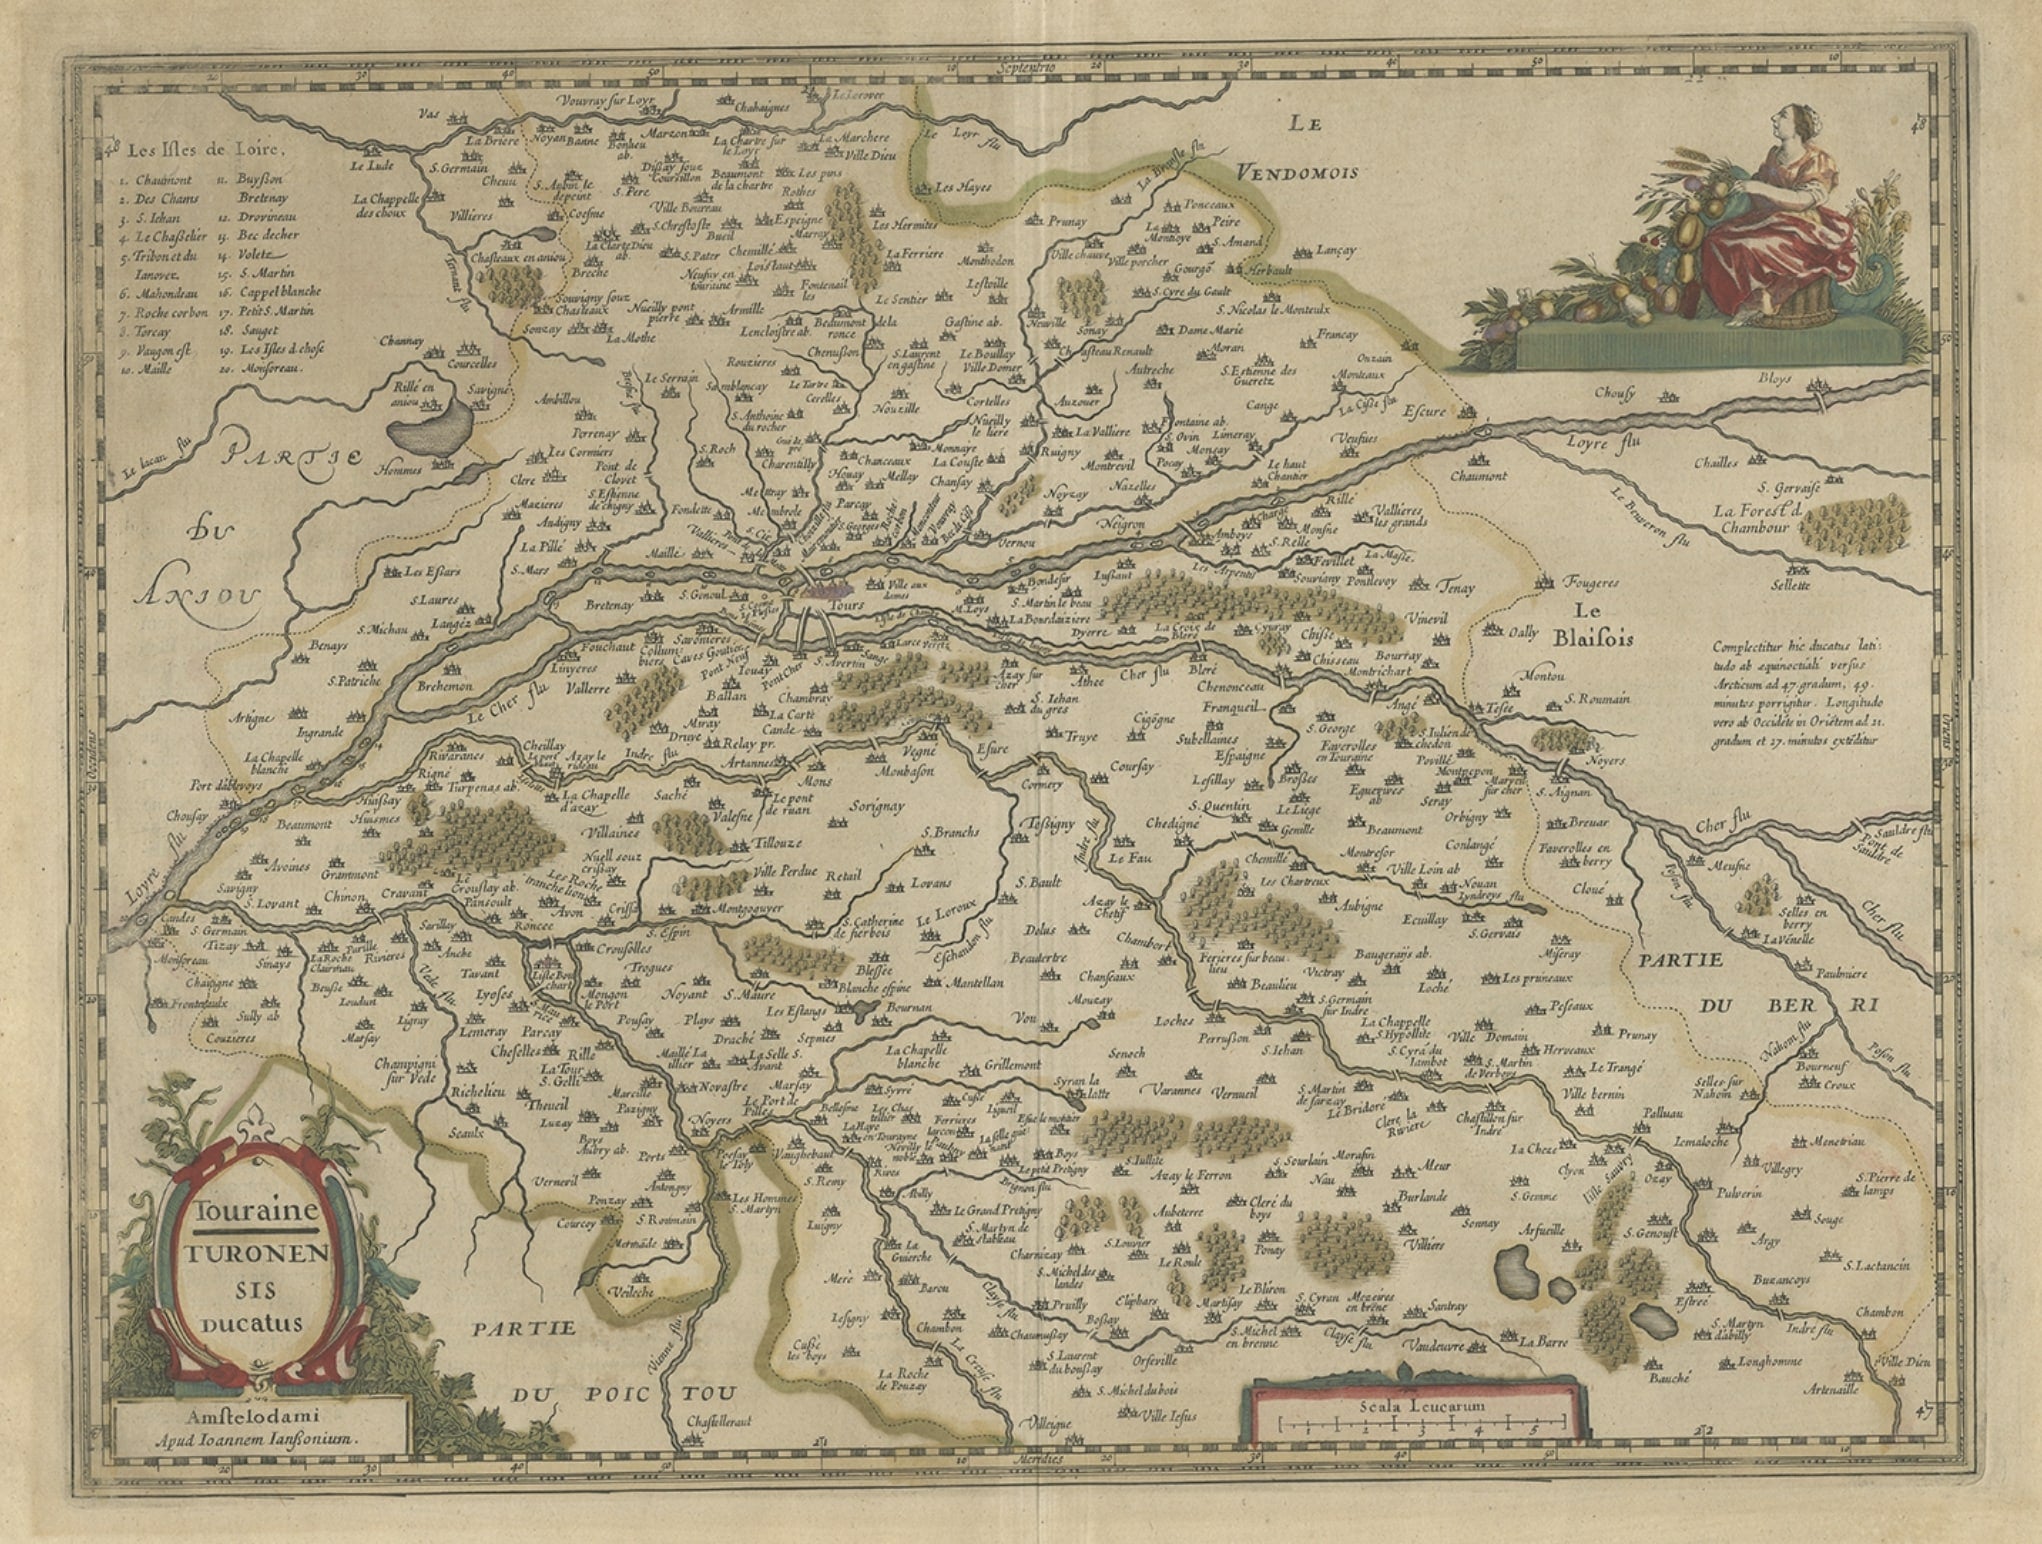 Antique Map of the Region of Touraine in France by Janssonius, 1657